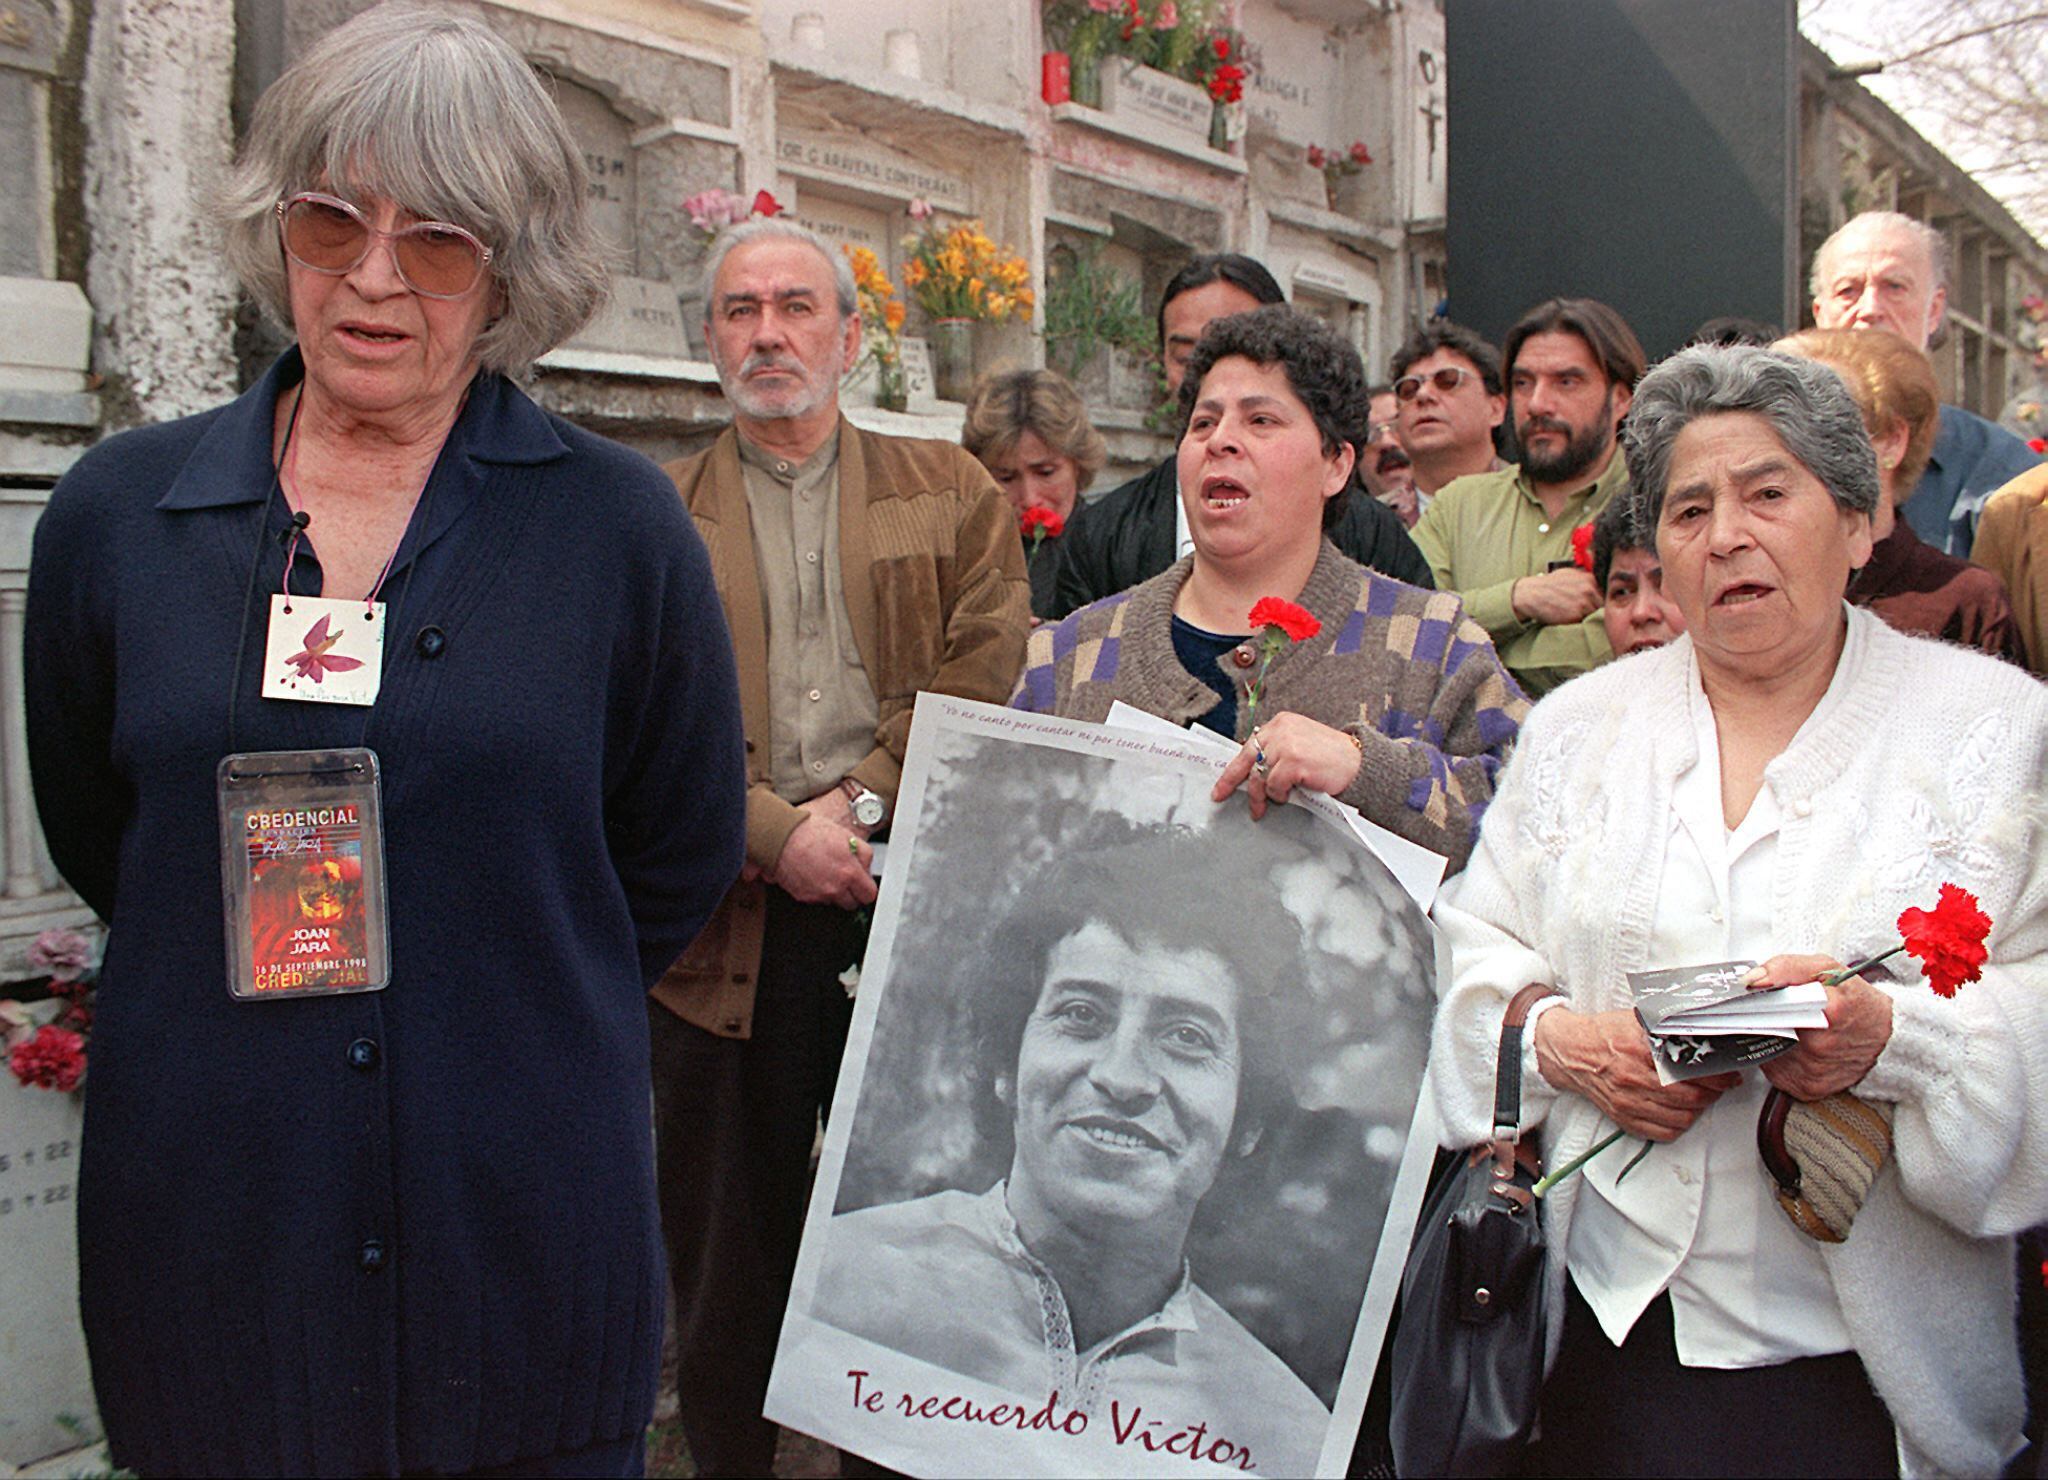 Joan Jara takes part in a tribute at the general cemetery to mark the 25th anniversary of the death of Víctor Jara in Santiago, on September 16, 1988. (Photo by GINNETTE RIQUELME / AFP).